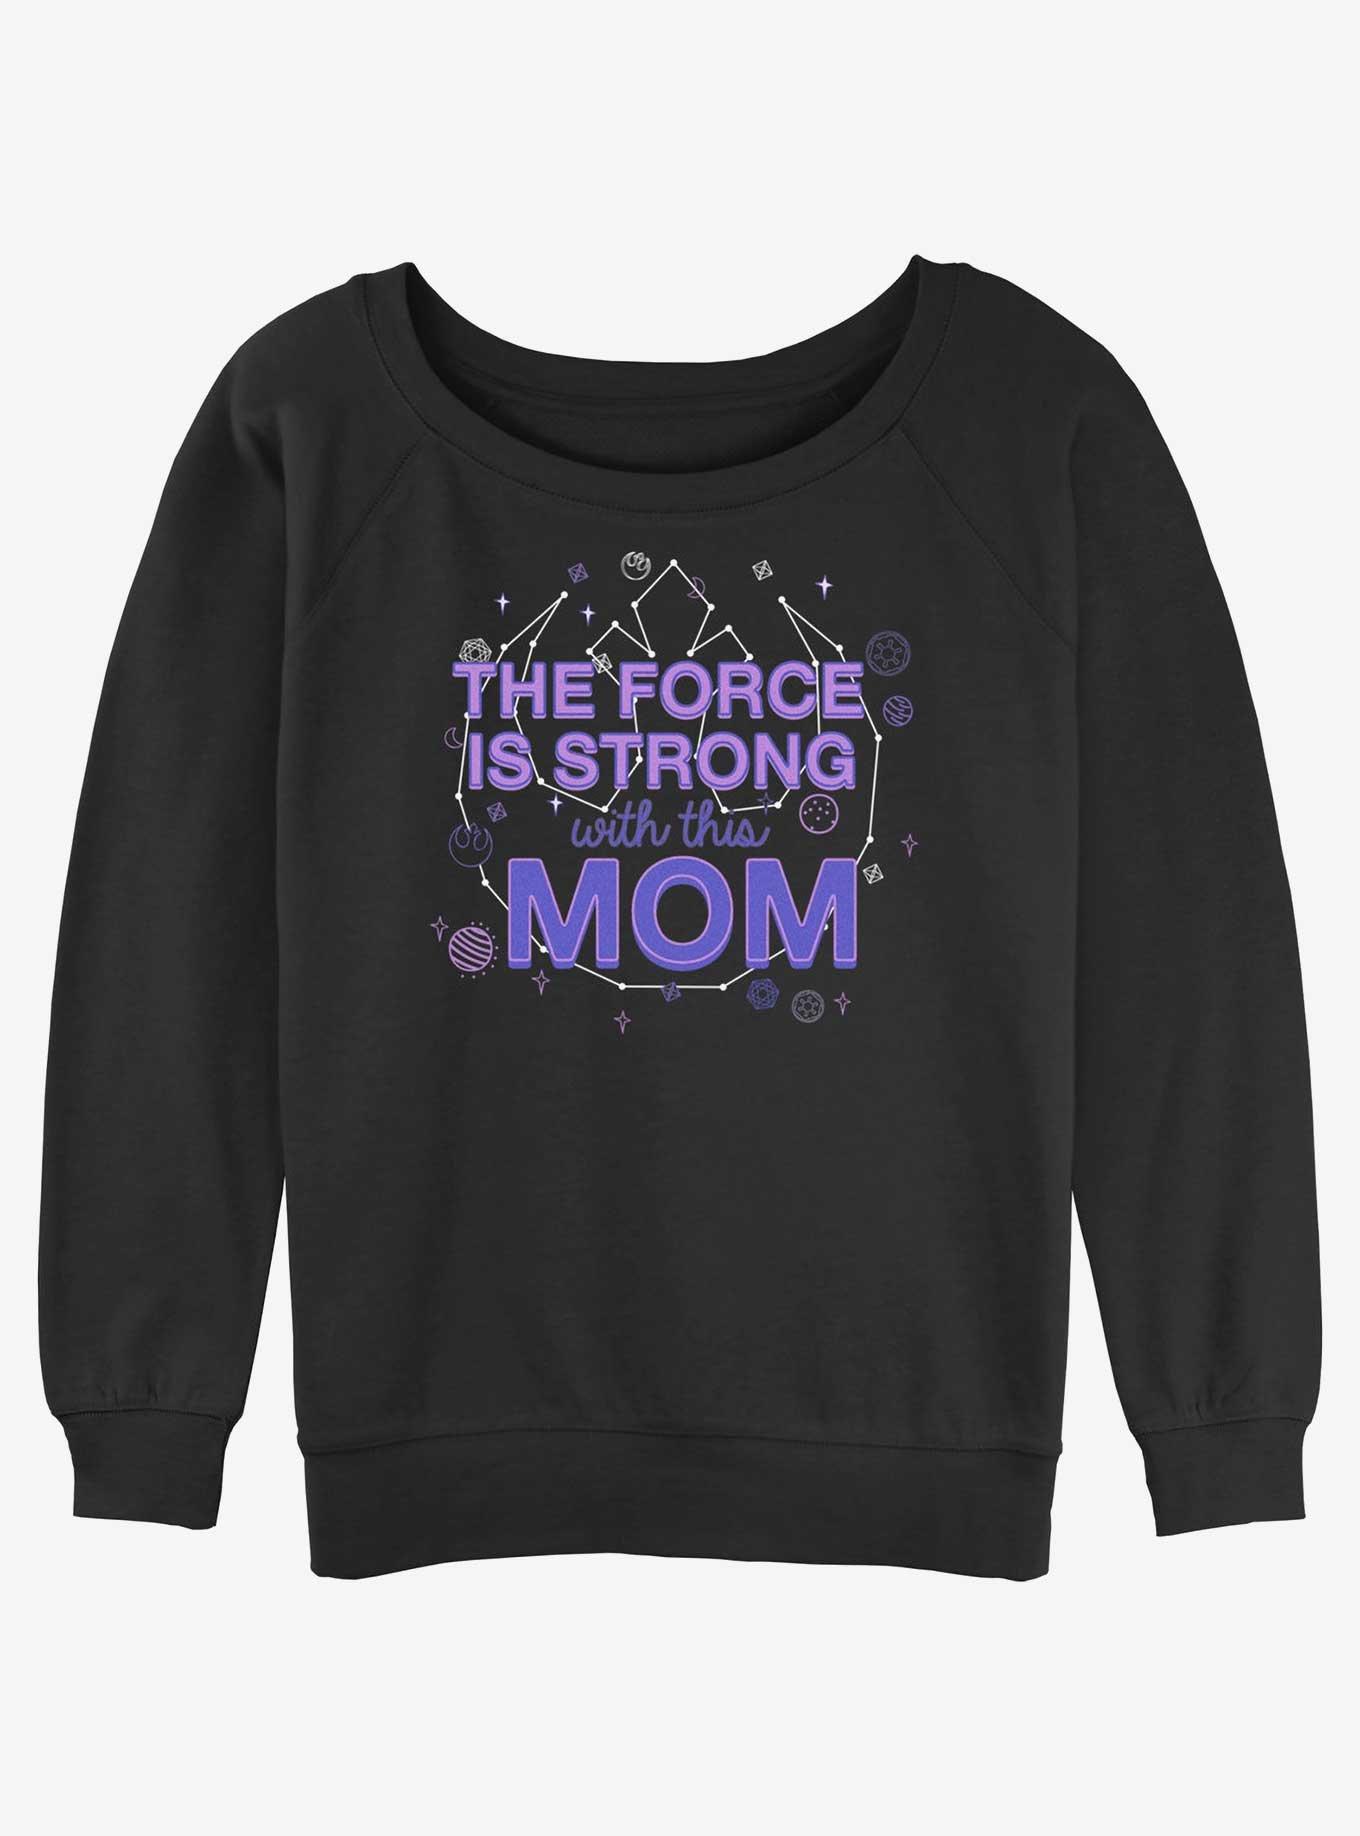 Disney Star Wars The Force Is Strong With This Mom Girls Slouchy Sweatshirt